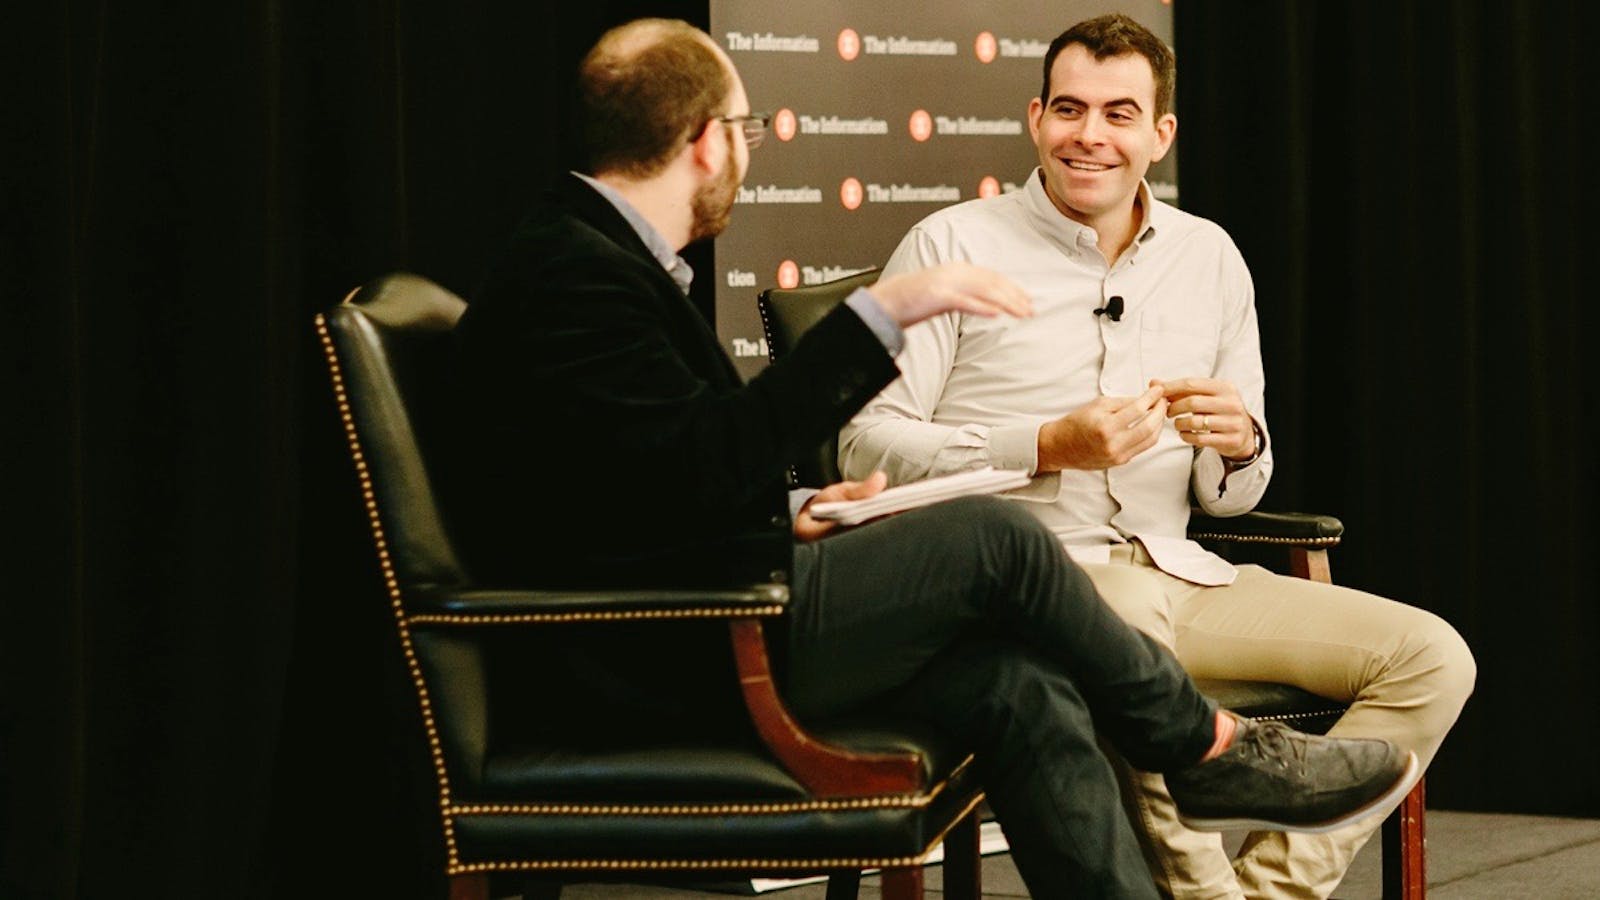 Facebook’s VP of News Feed Adam Mosseri talking with The Information's Cory Weinberg on Tuesday. Photo by Karen Obrist  